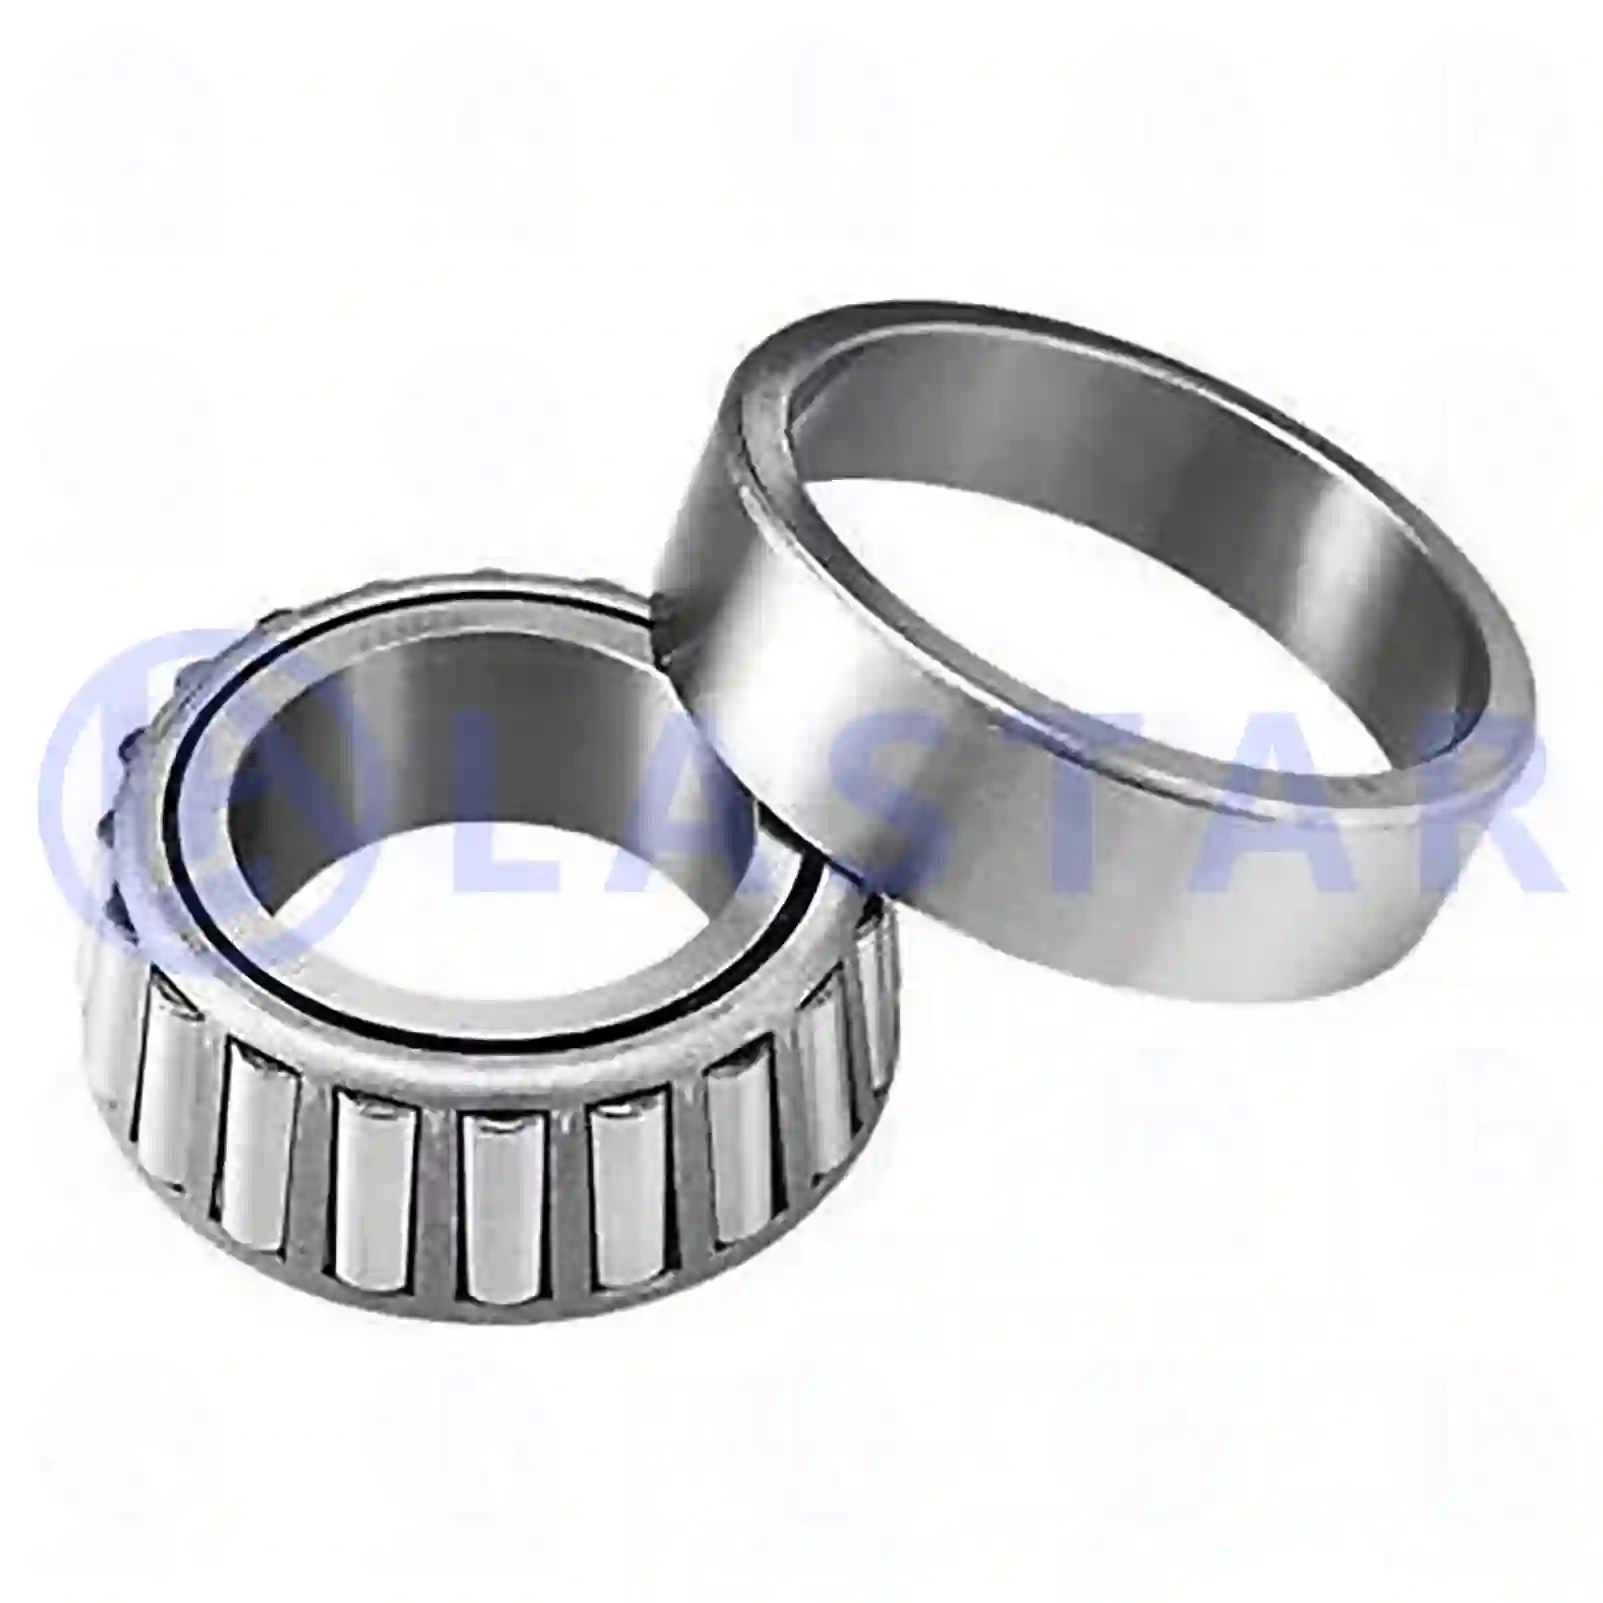 Tapered roller bearing, 77726036, 8052029DE, 8-12337578-0, 1584340, 322748, 1584340, 1584380, 8151816, ZG02976-0008 ||  77726036 Lastar Spare Part | Truck Spare Parts, Auotomotive Spare Parts Tapered roller bearing, 77726036, 8052029DE, 8-12337578-0, 1584340, 322748, 1584340, 1584380, 8151816, ZG02976-0008 ||  77726036 Lastar Spare Part | Truck Spare Parts, Auotomotive Spare Parts